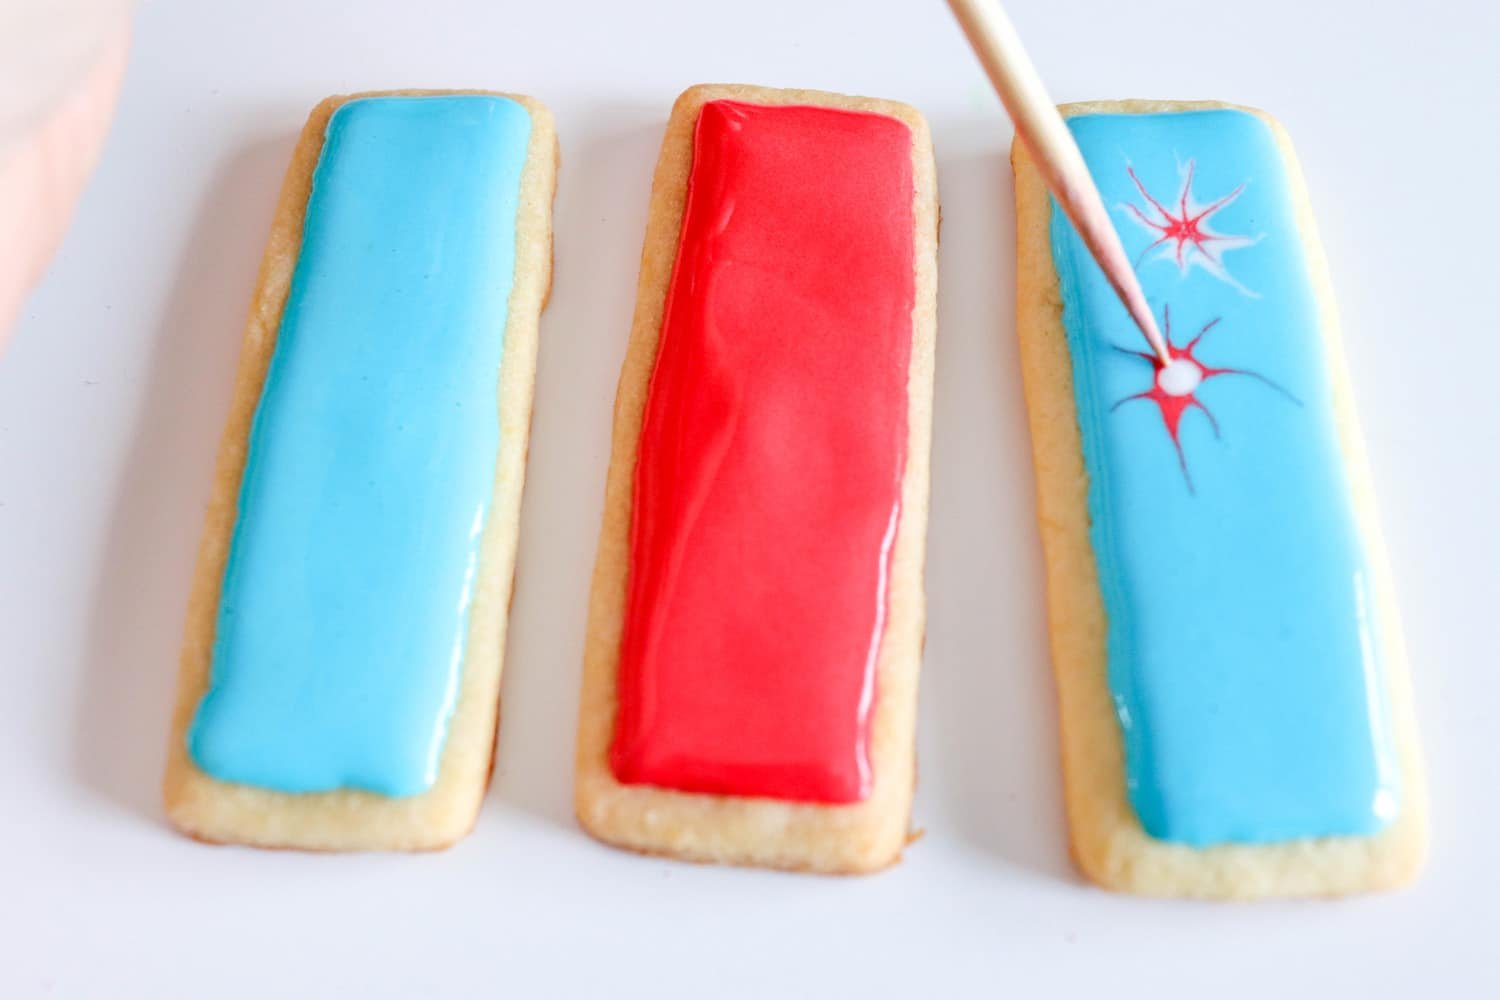 toothpick making design on independence day cookies